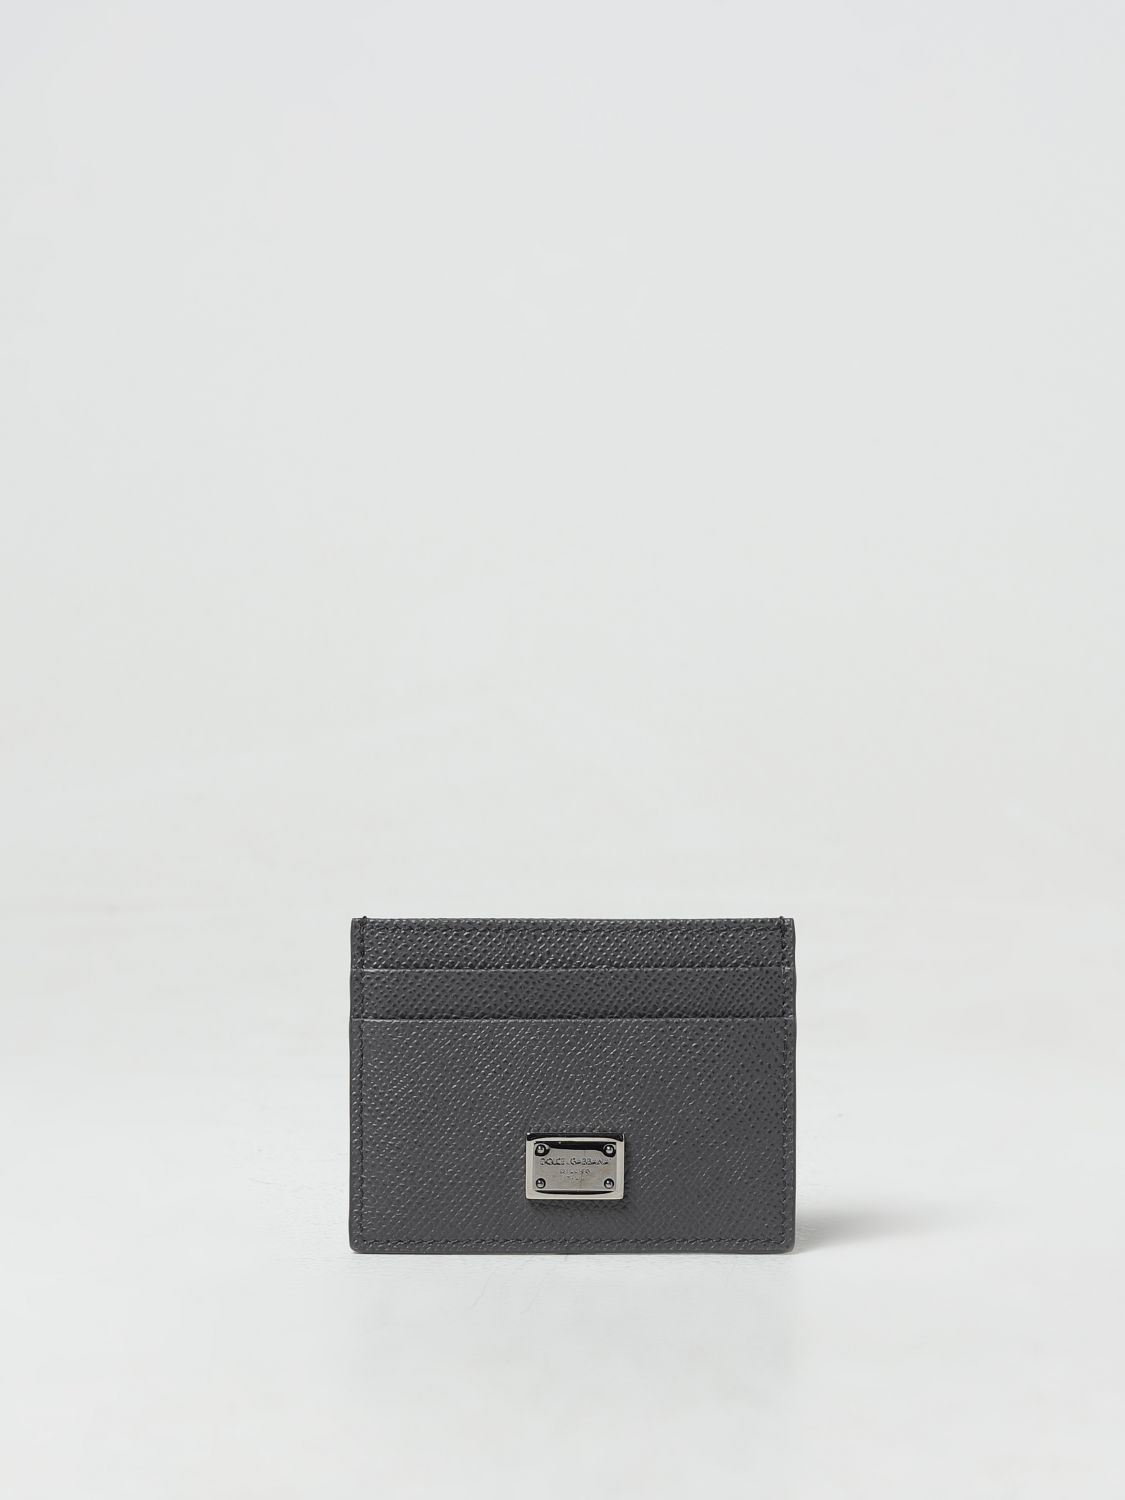 Dolce & Gabbana Credit Card Holder In Grained Leather In Gold